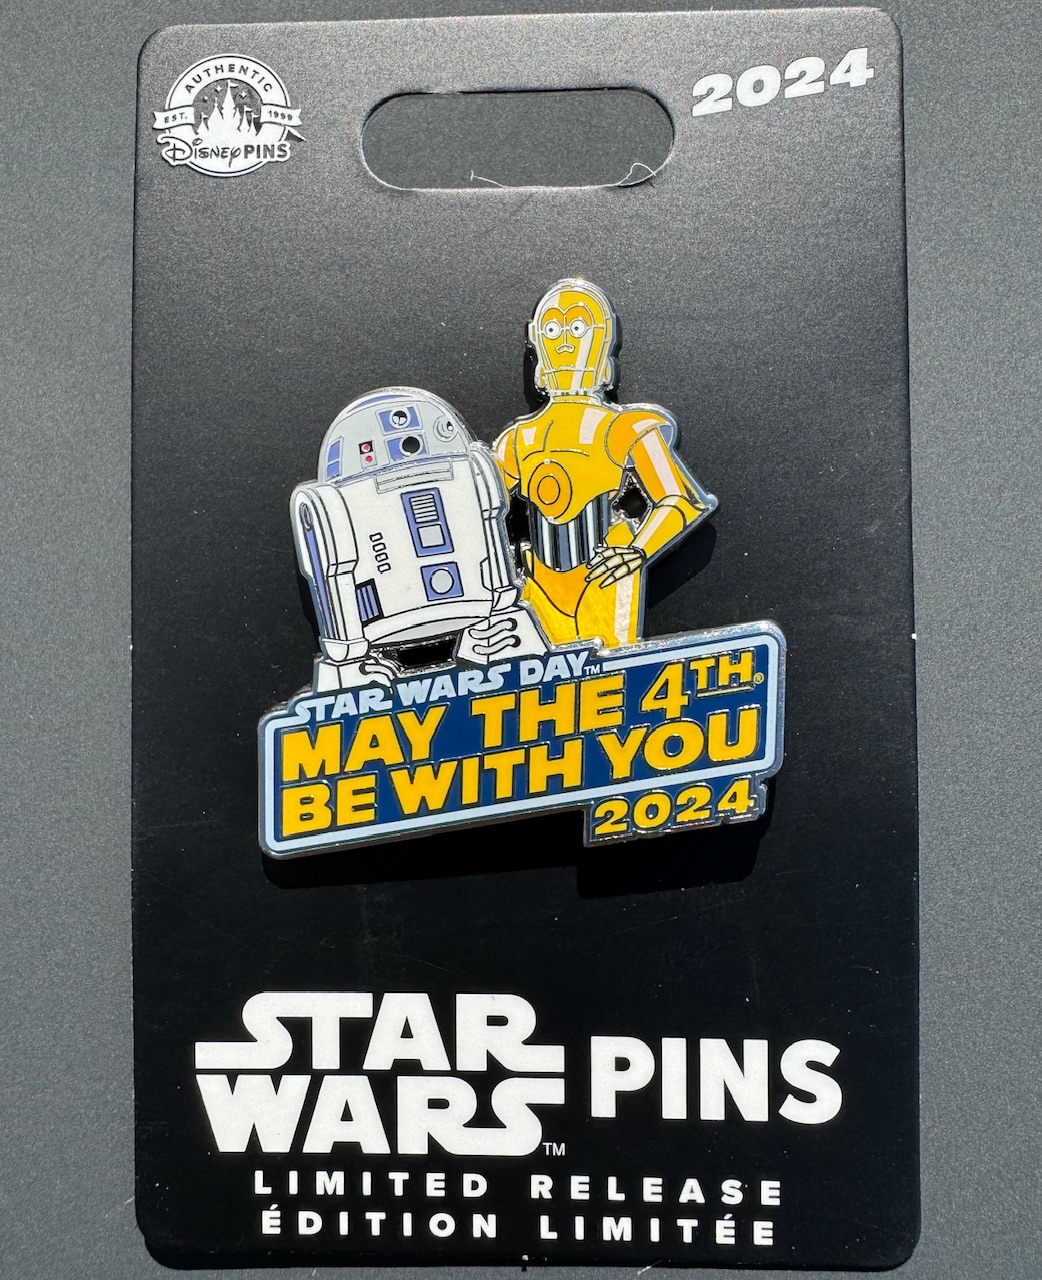 Star Wars Day ”May the 4th Be With You” 2024 Disney Pins - Disney 